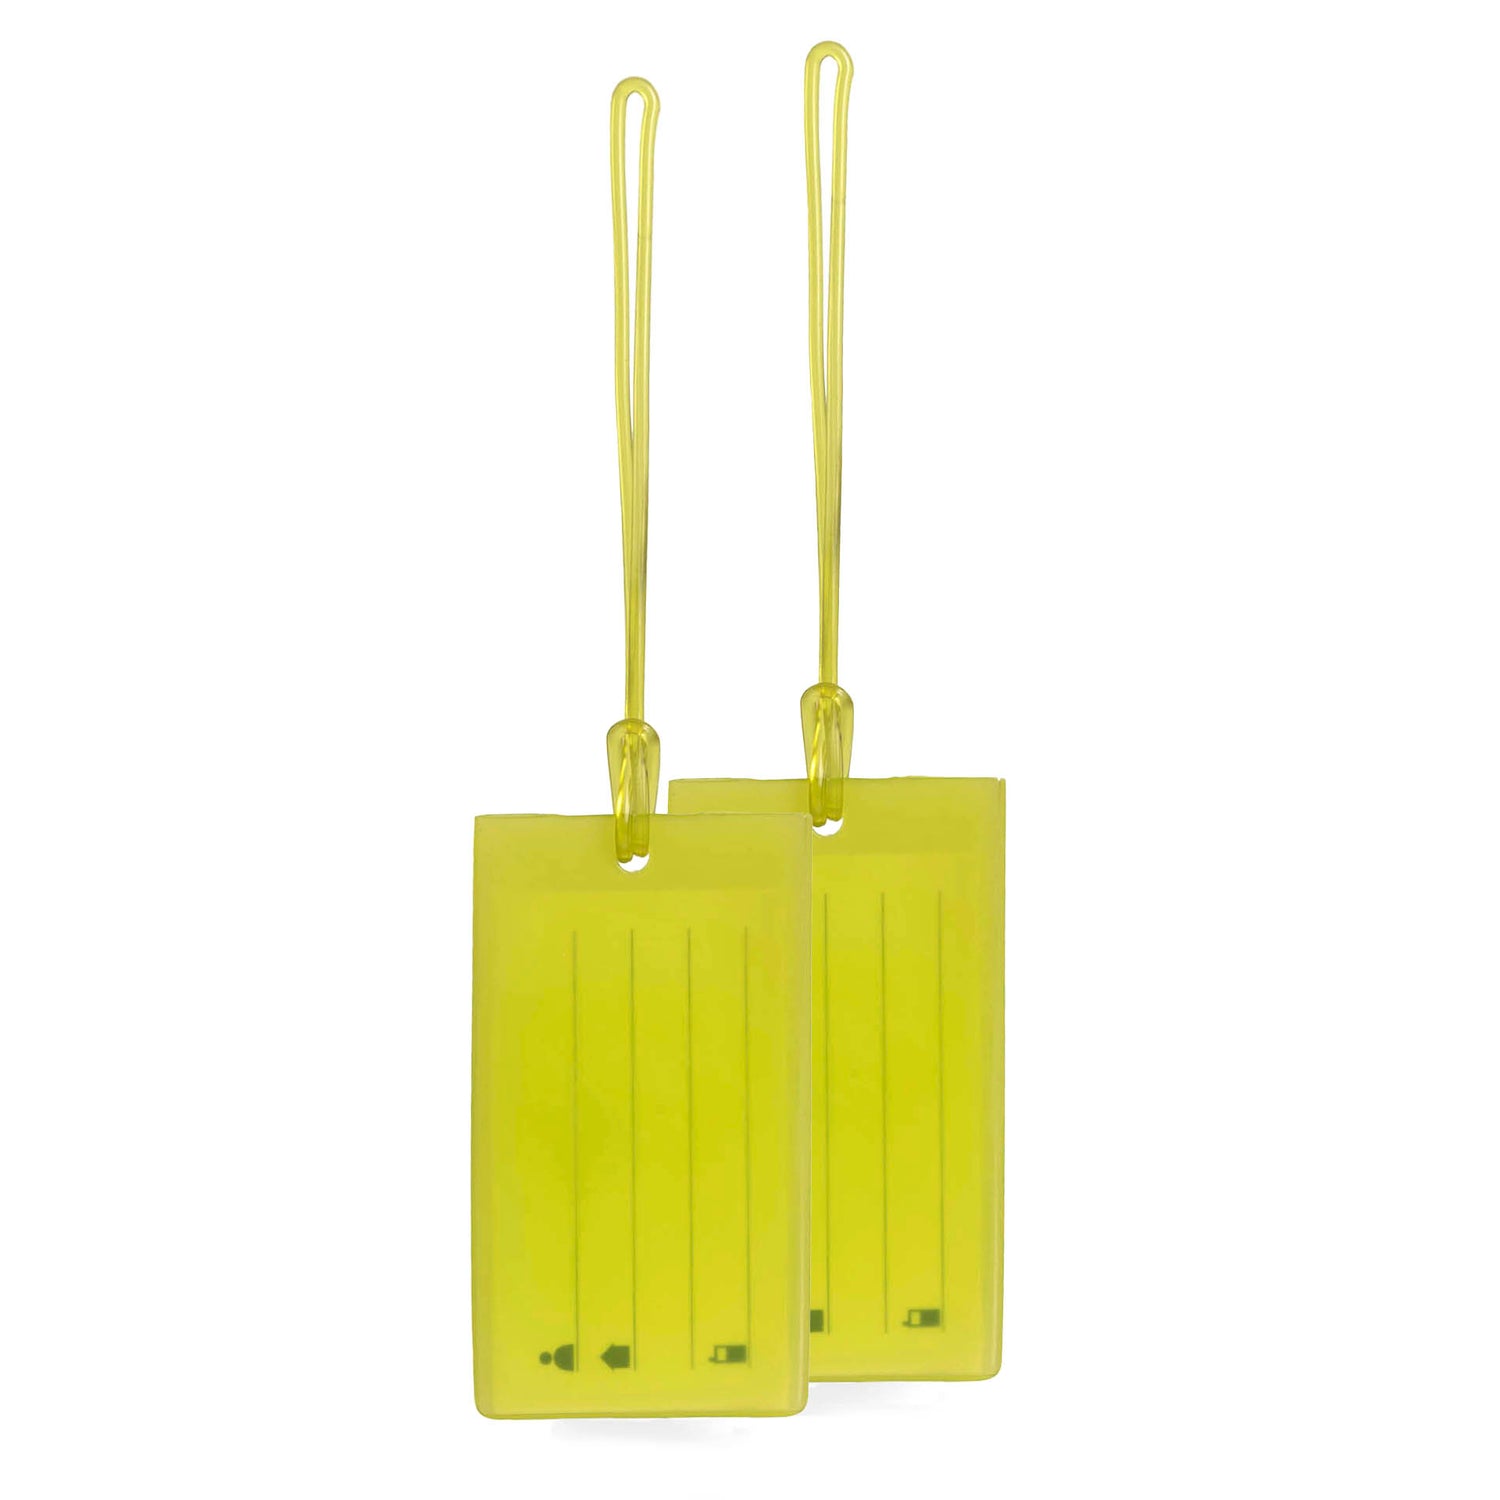 2 flourescent yellow luggage tags in a jelly material with elastic bands knotted around it in the same colour.